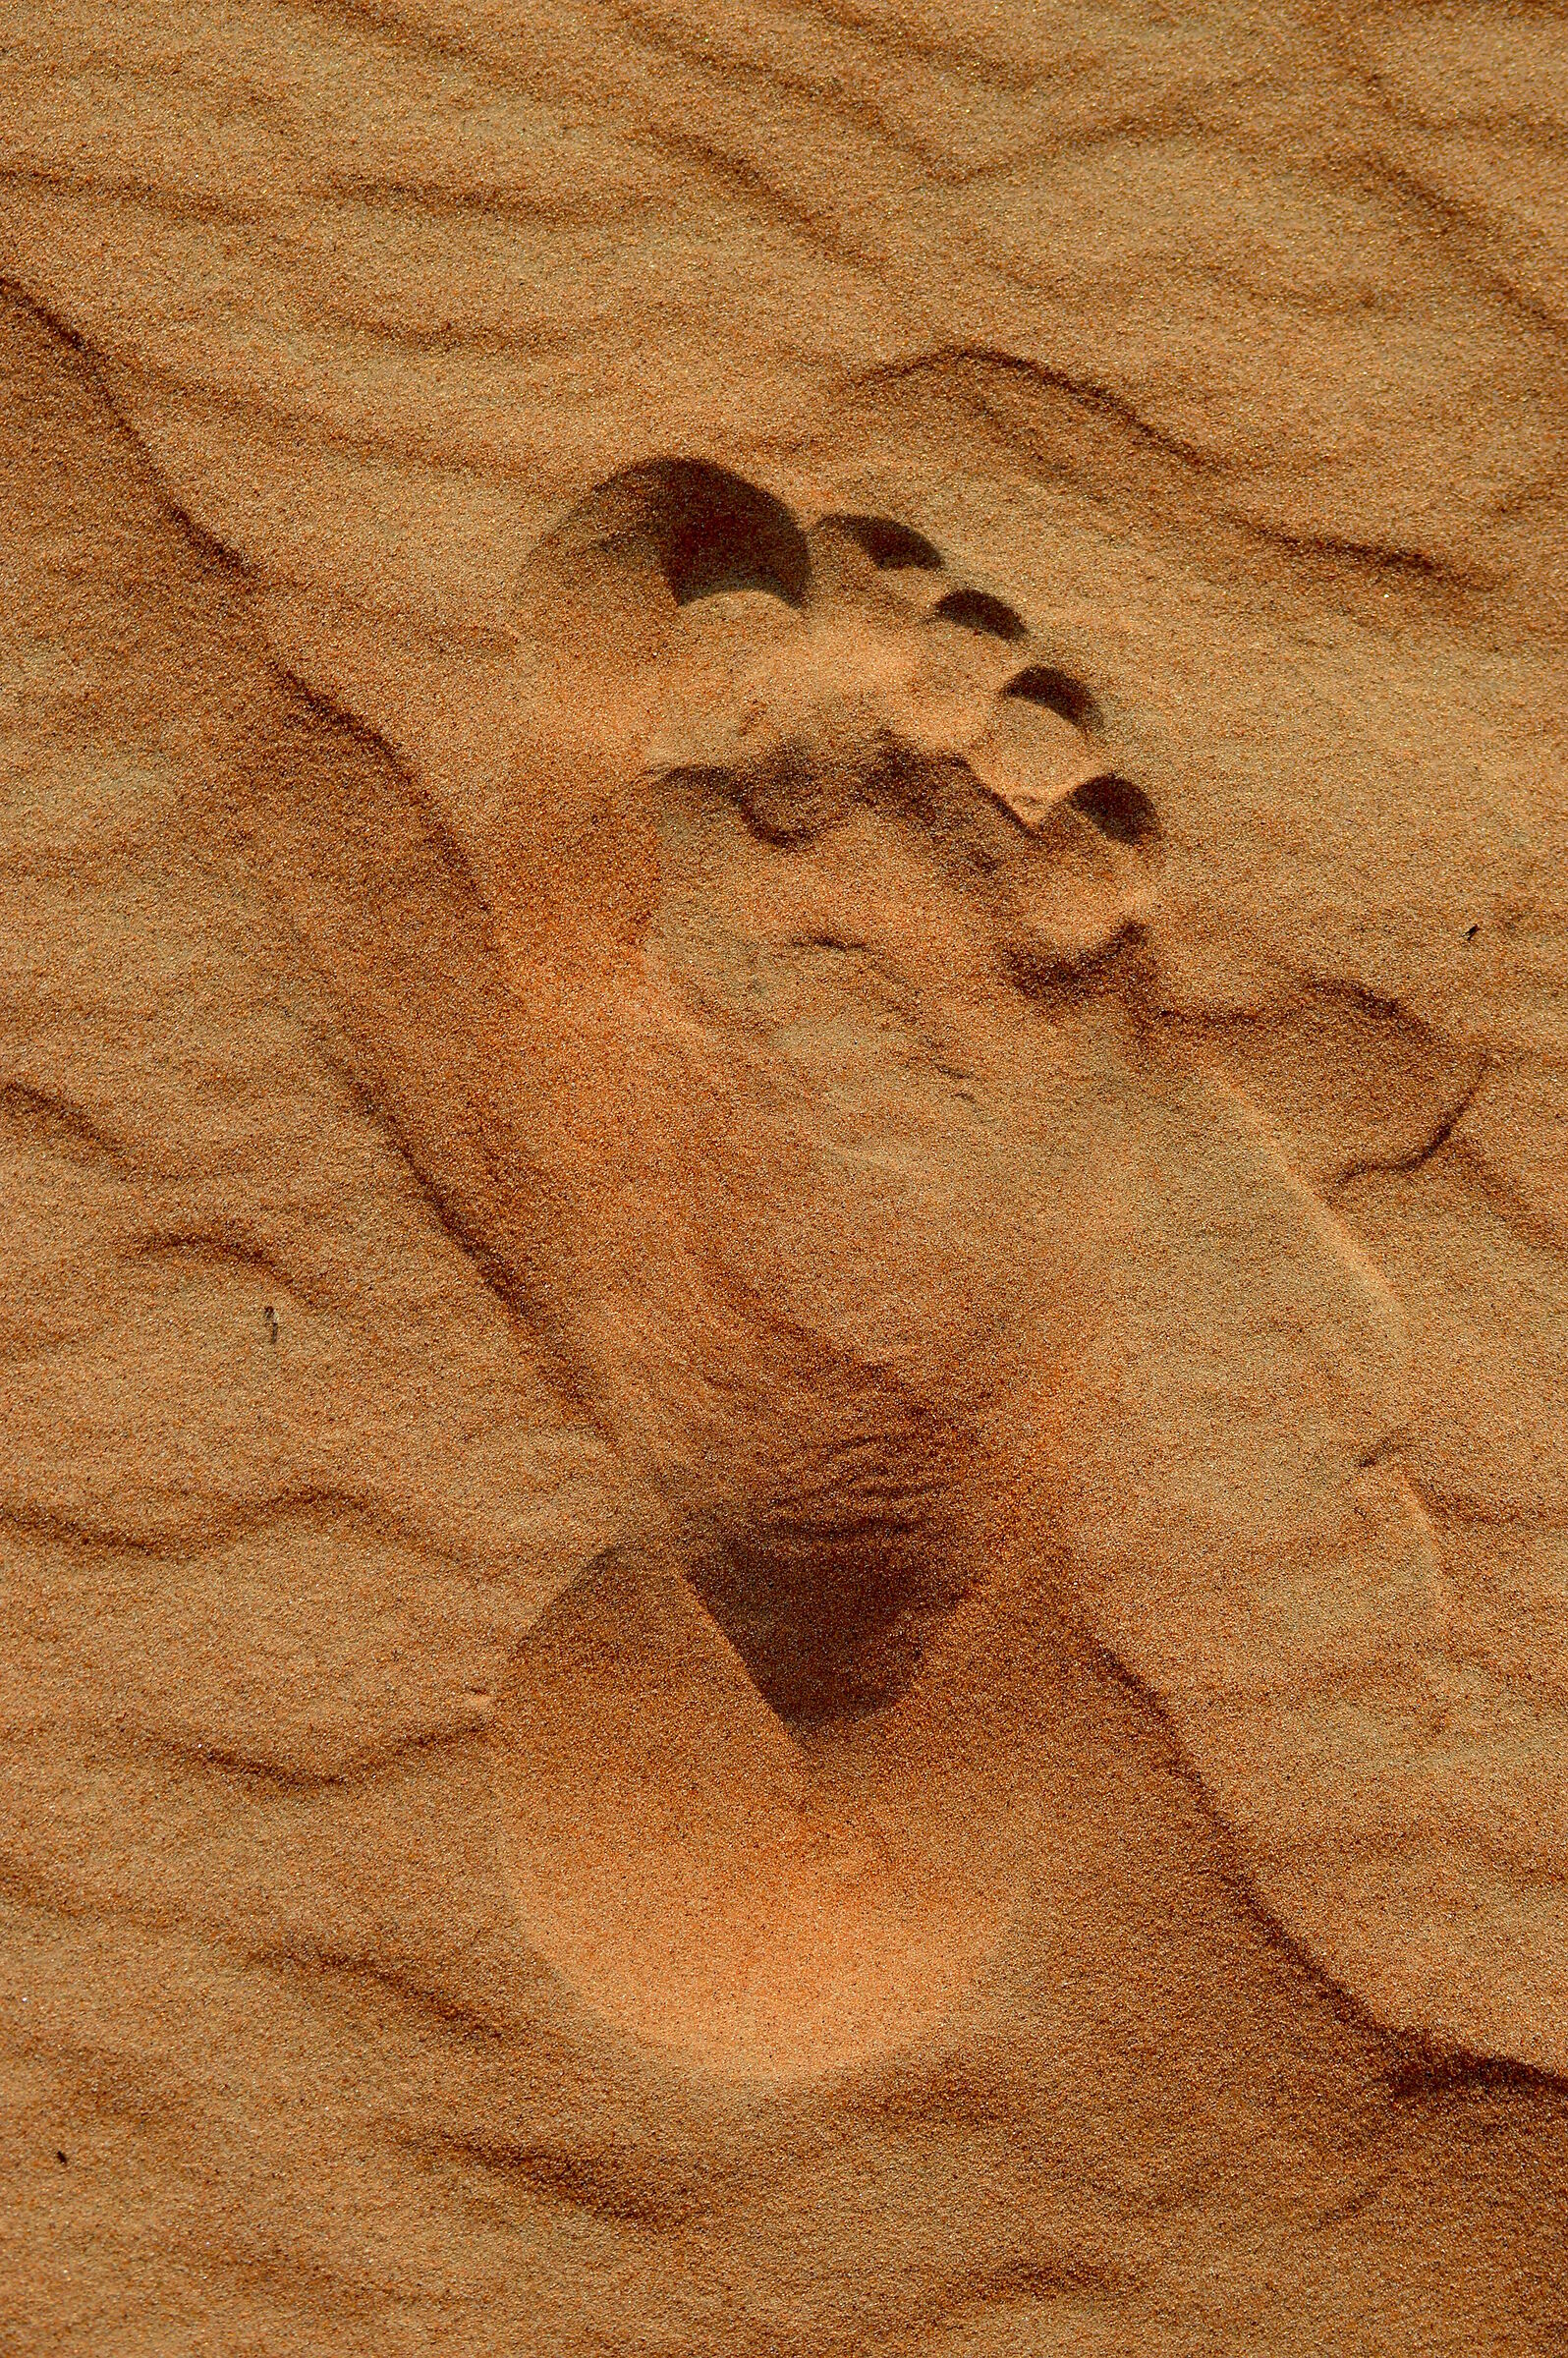 Man's first footprint on the dune......